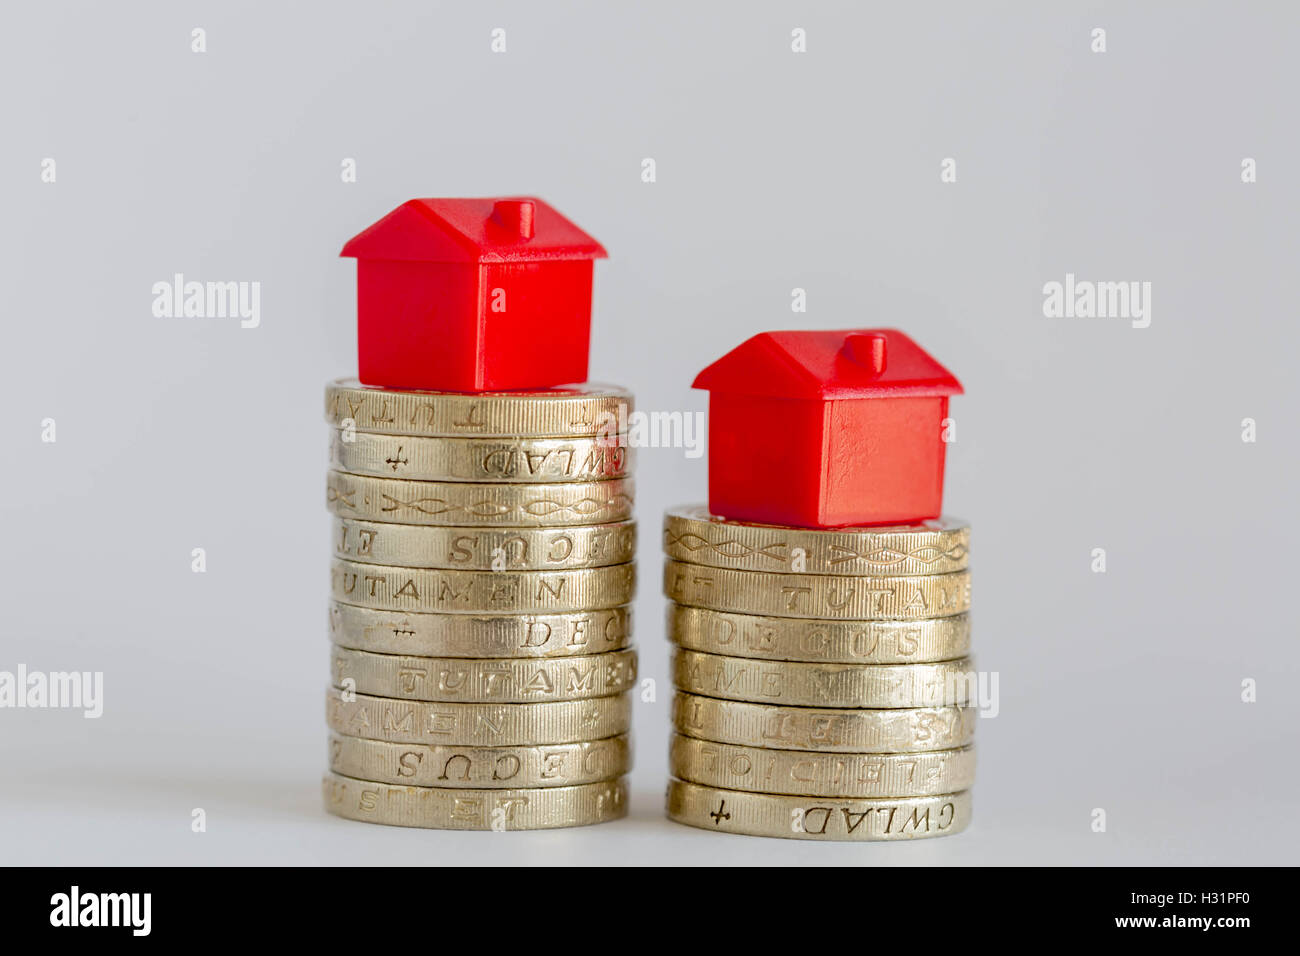 Concept image depicting housing/property markets. Stock Photo